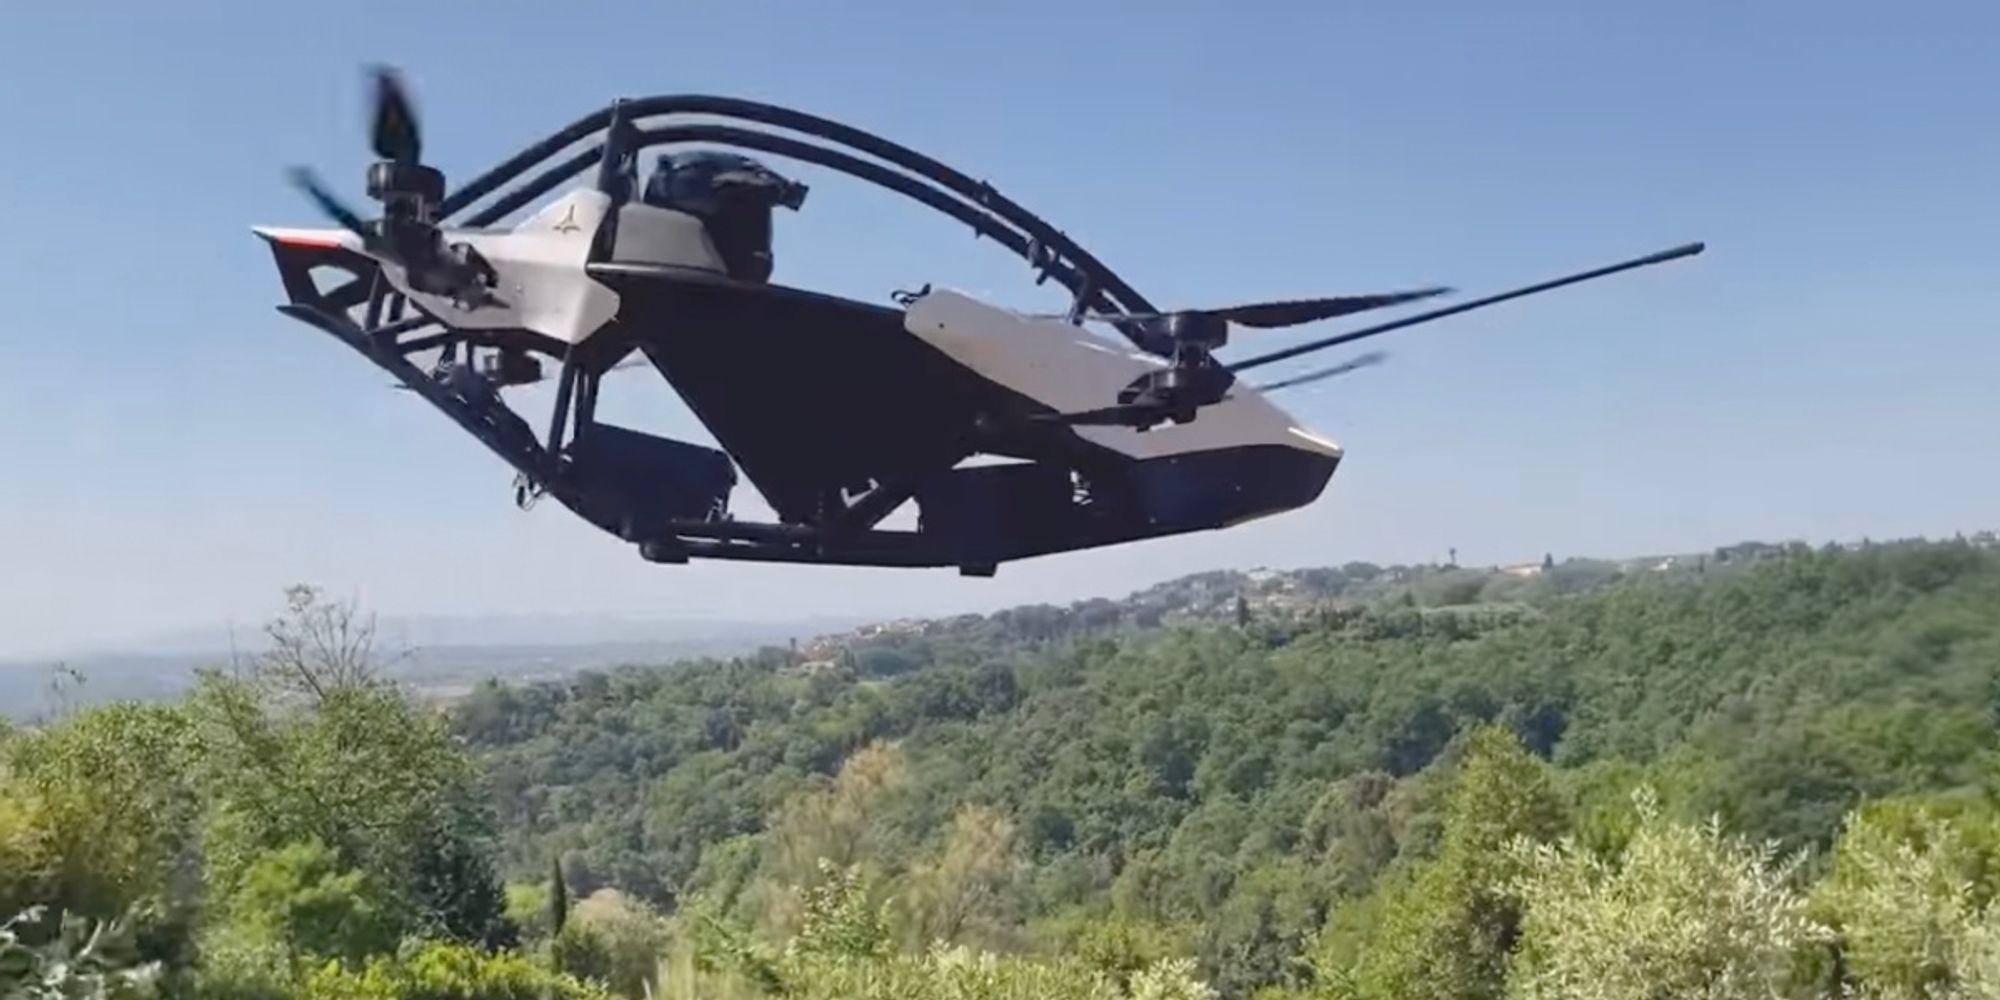 Jetson ONE flying car makes its first eVTOL commute to work - DroneDJ